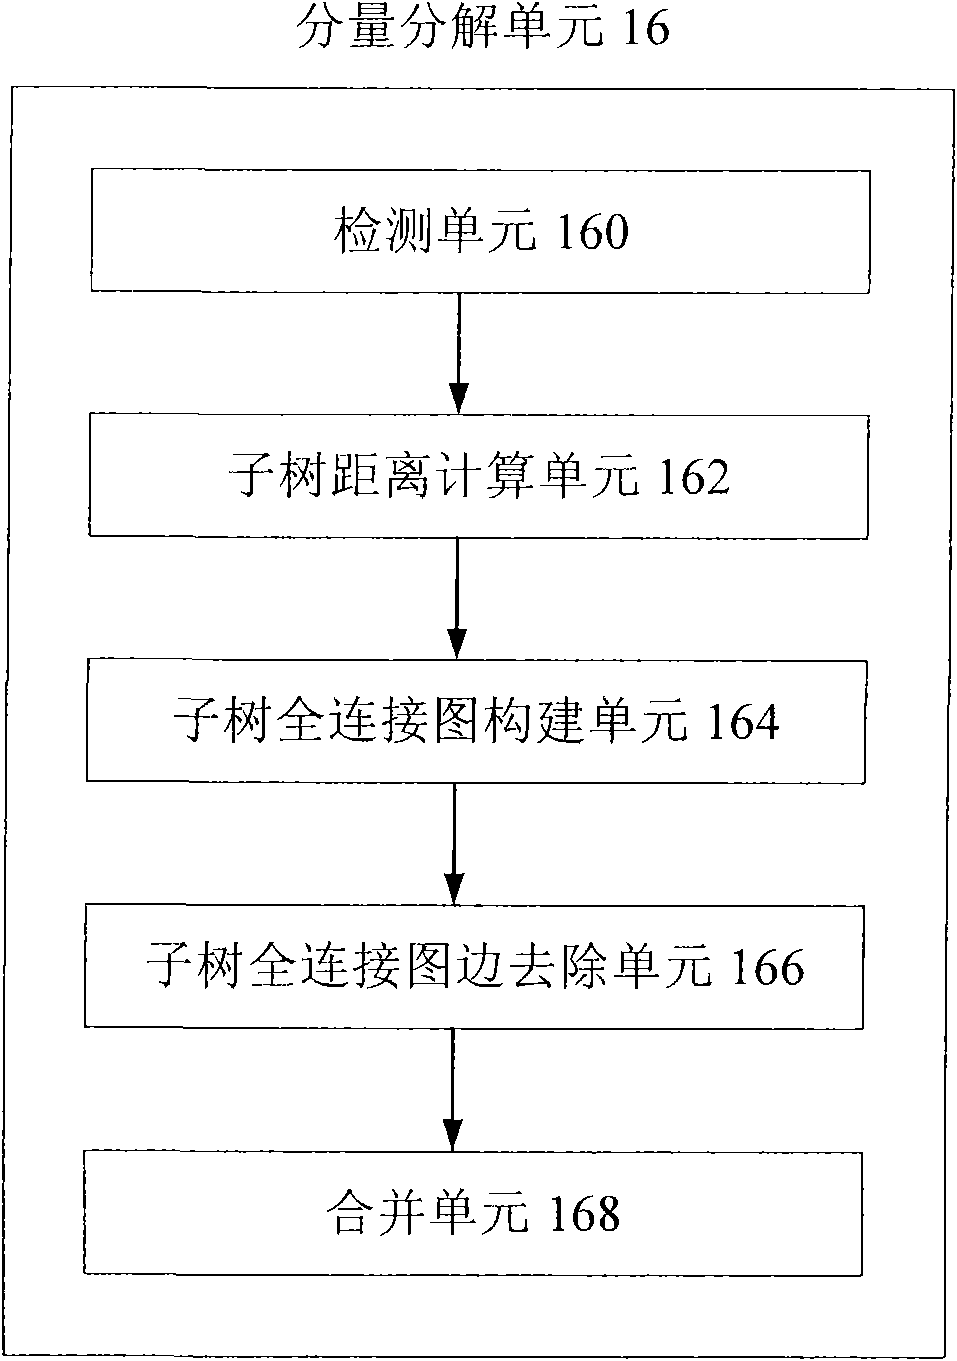 Data anonymization device and method